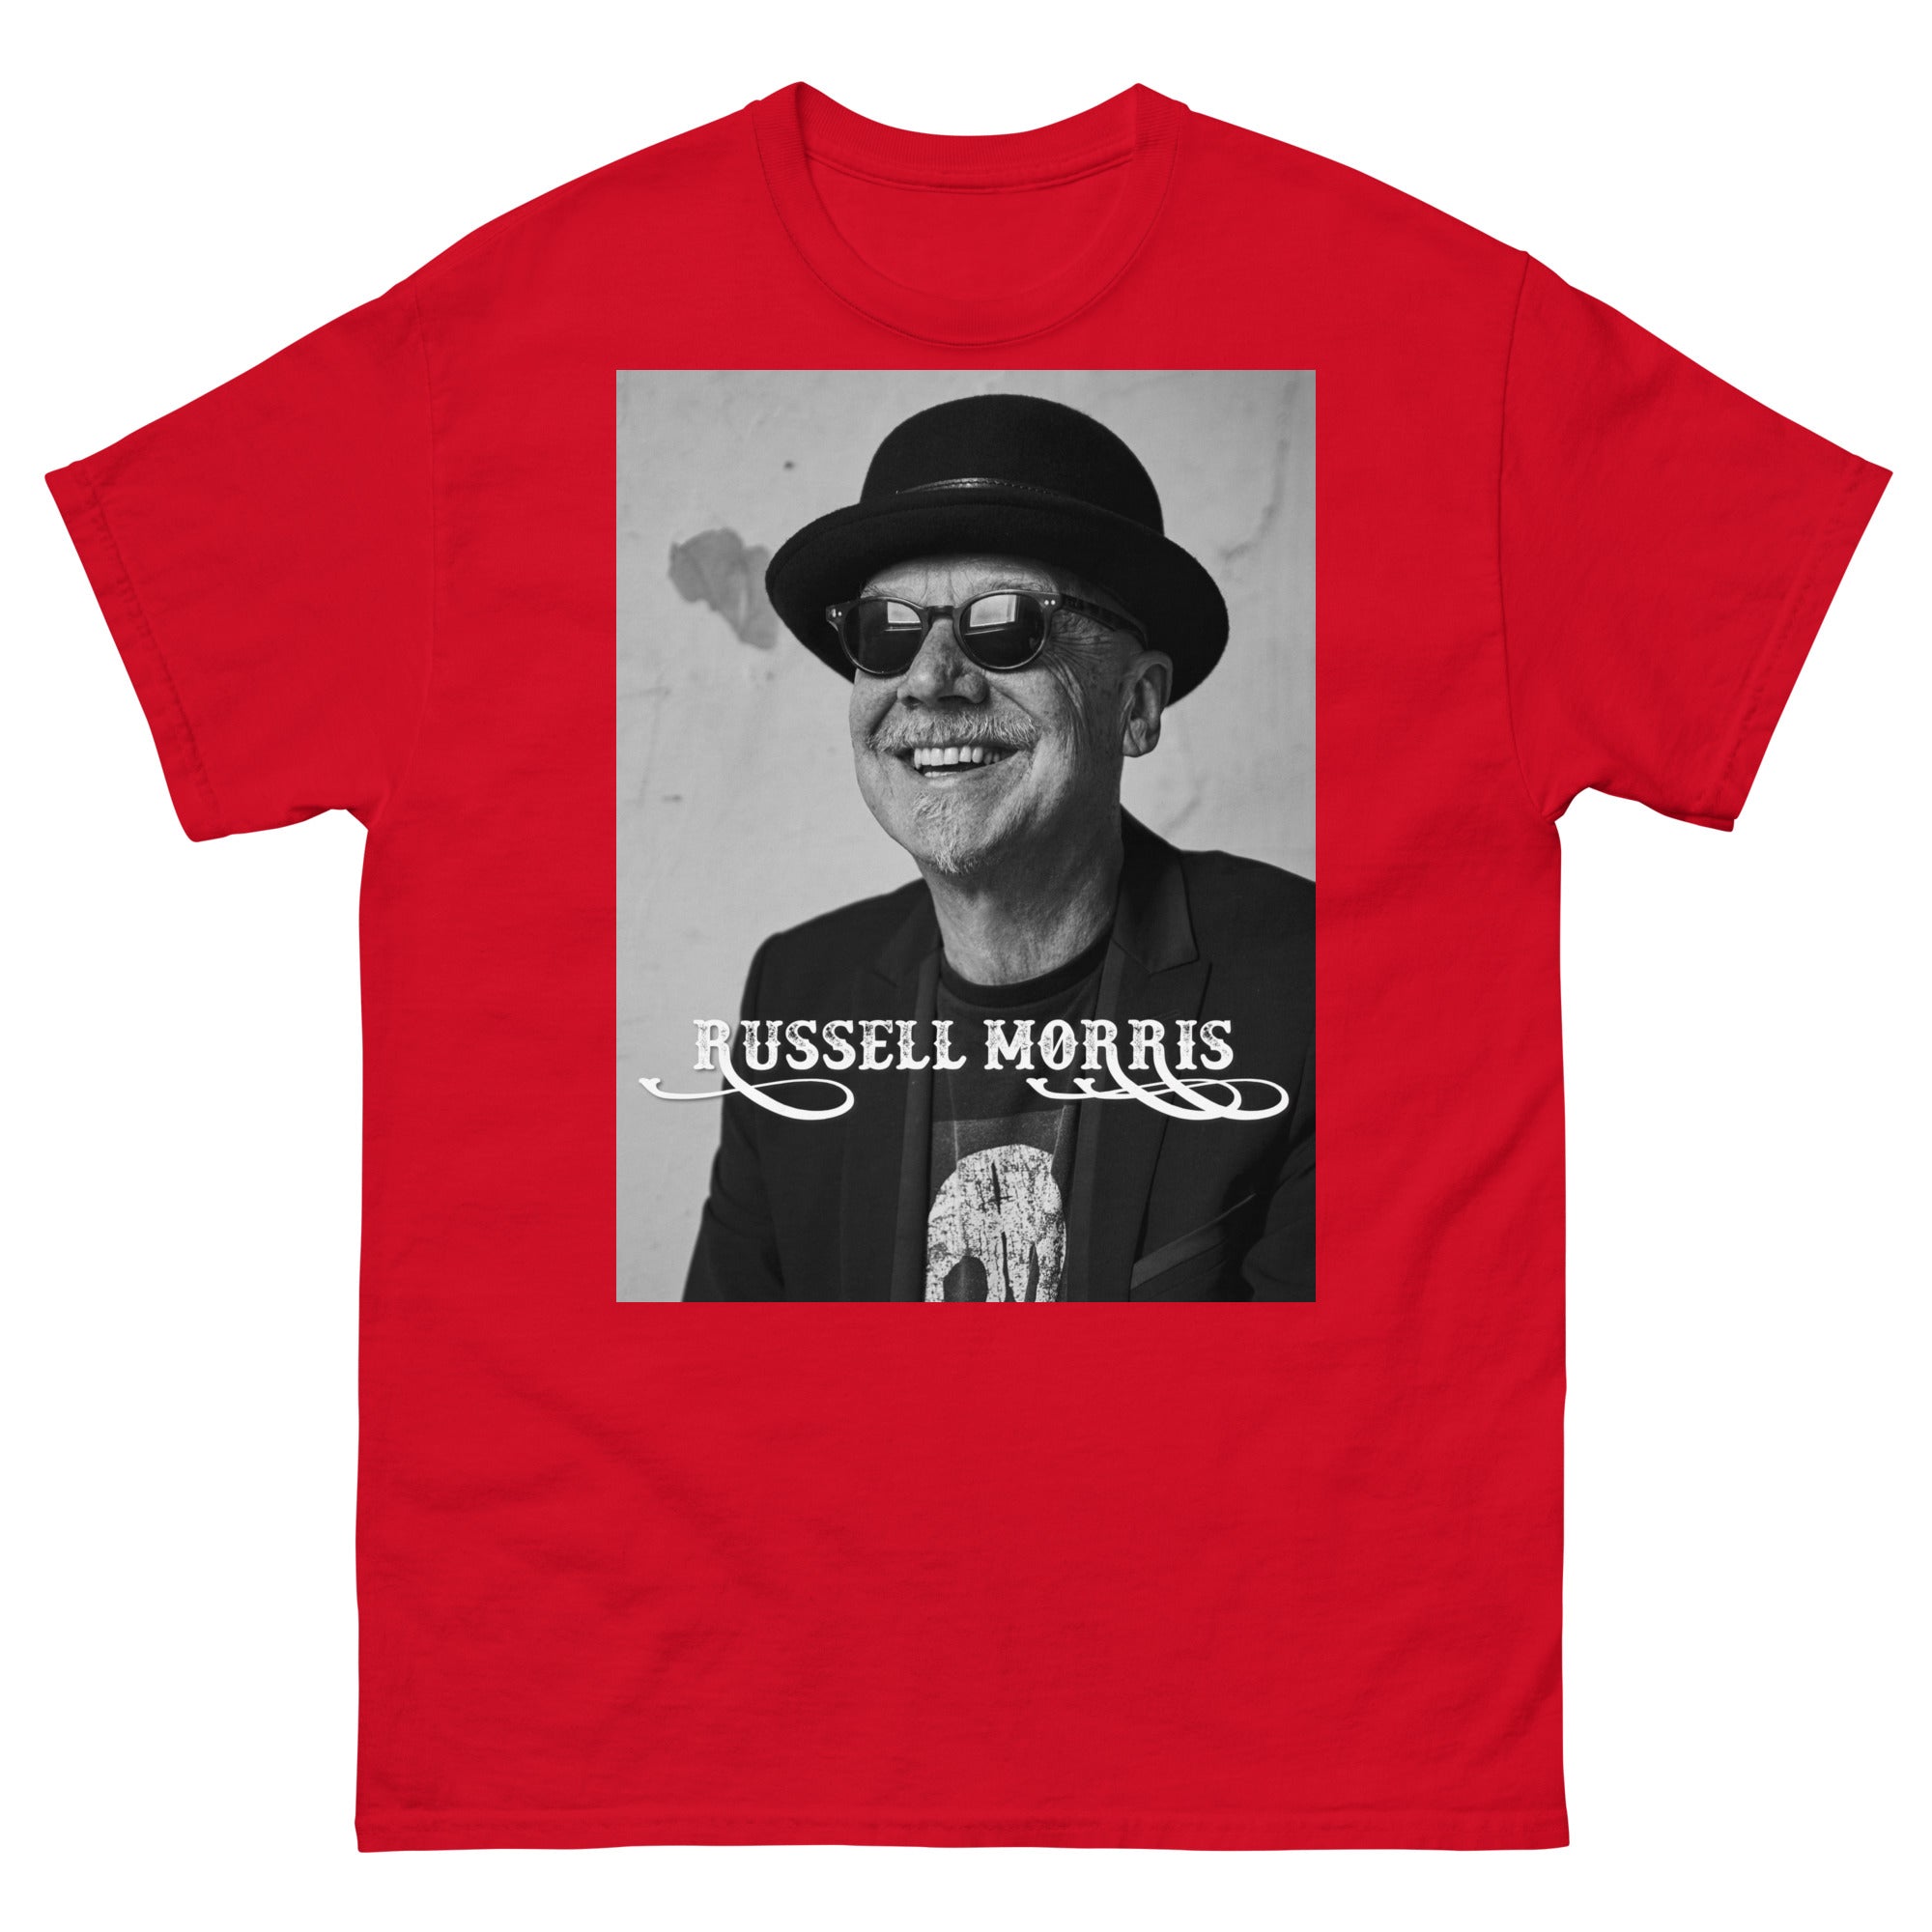 RUSSELL MORRIS - CLASSIC MEN'S TEE (THE REAL SMILE)